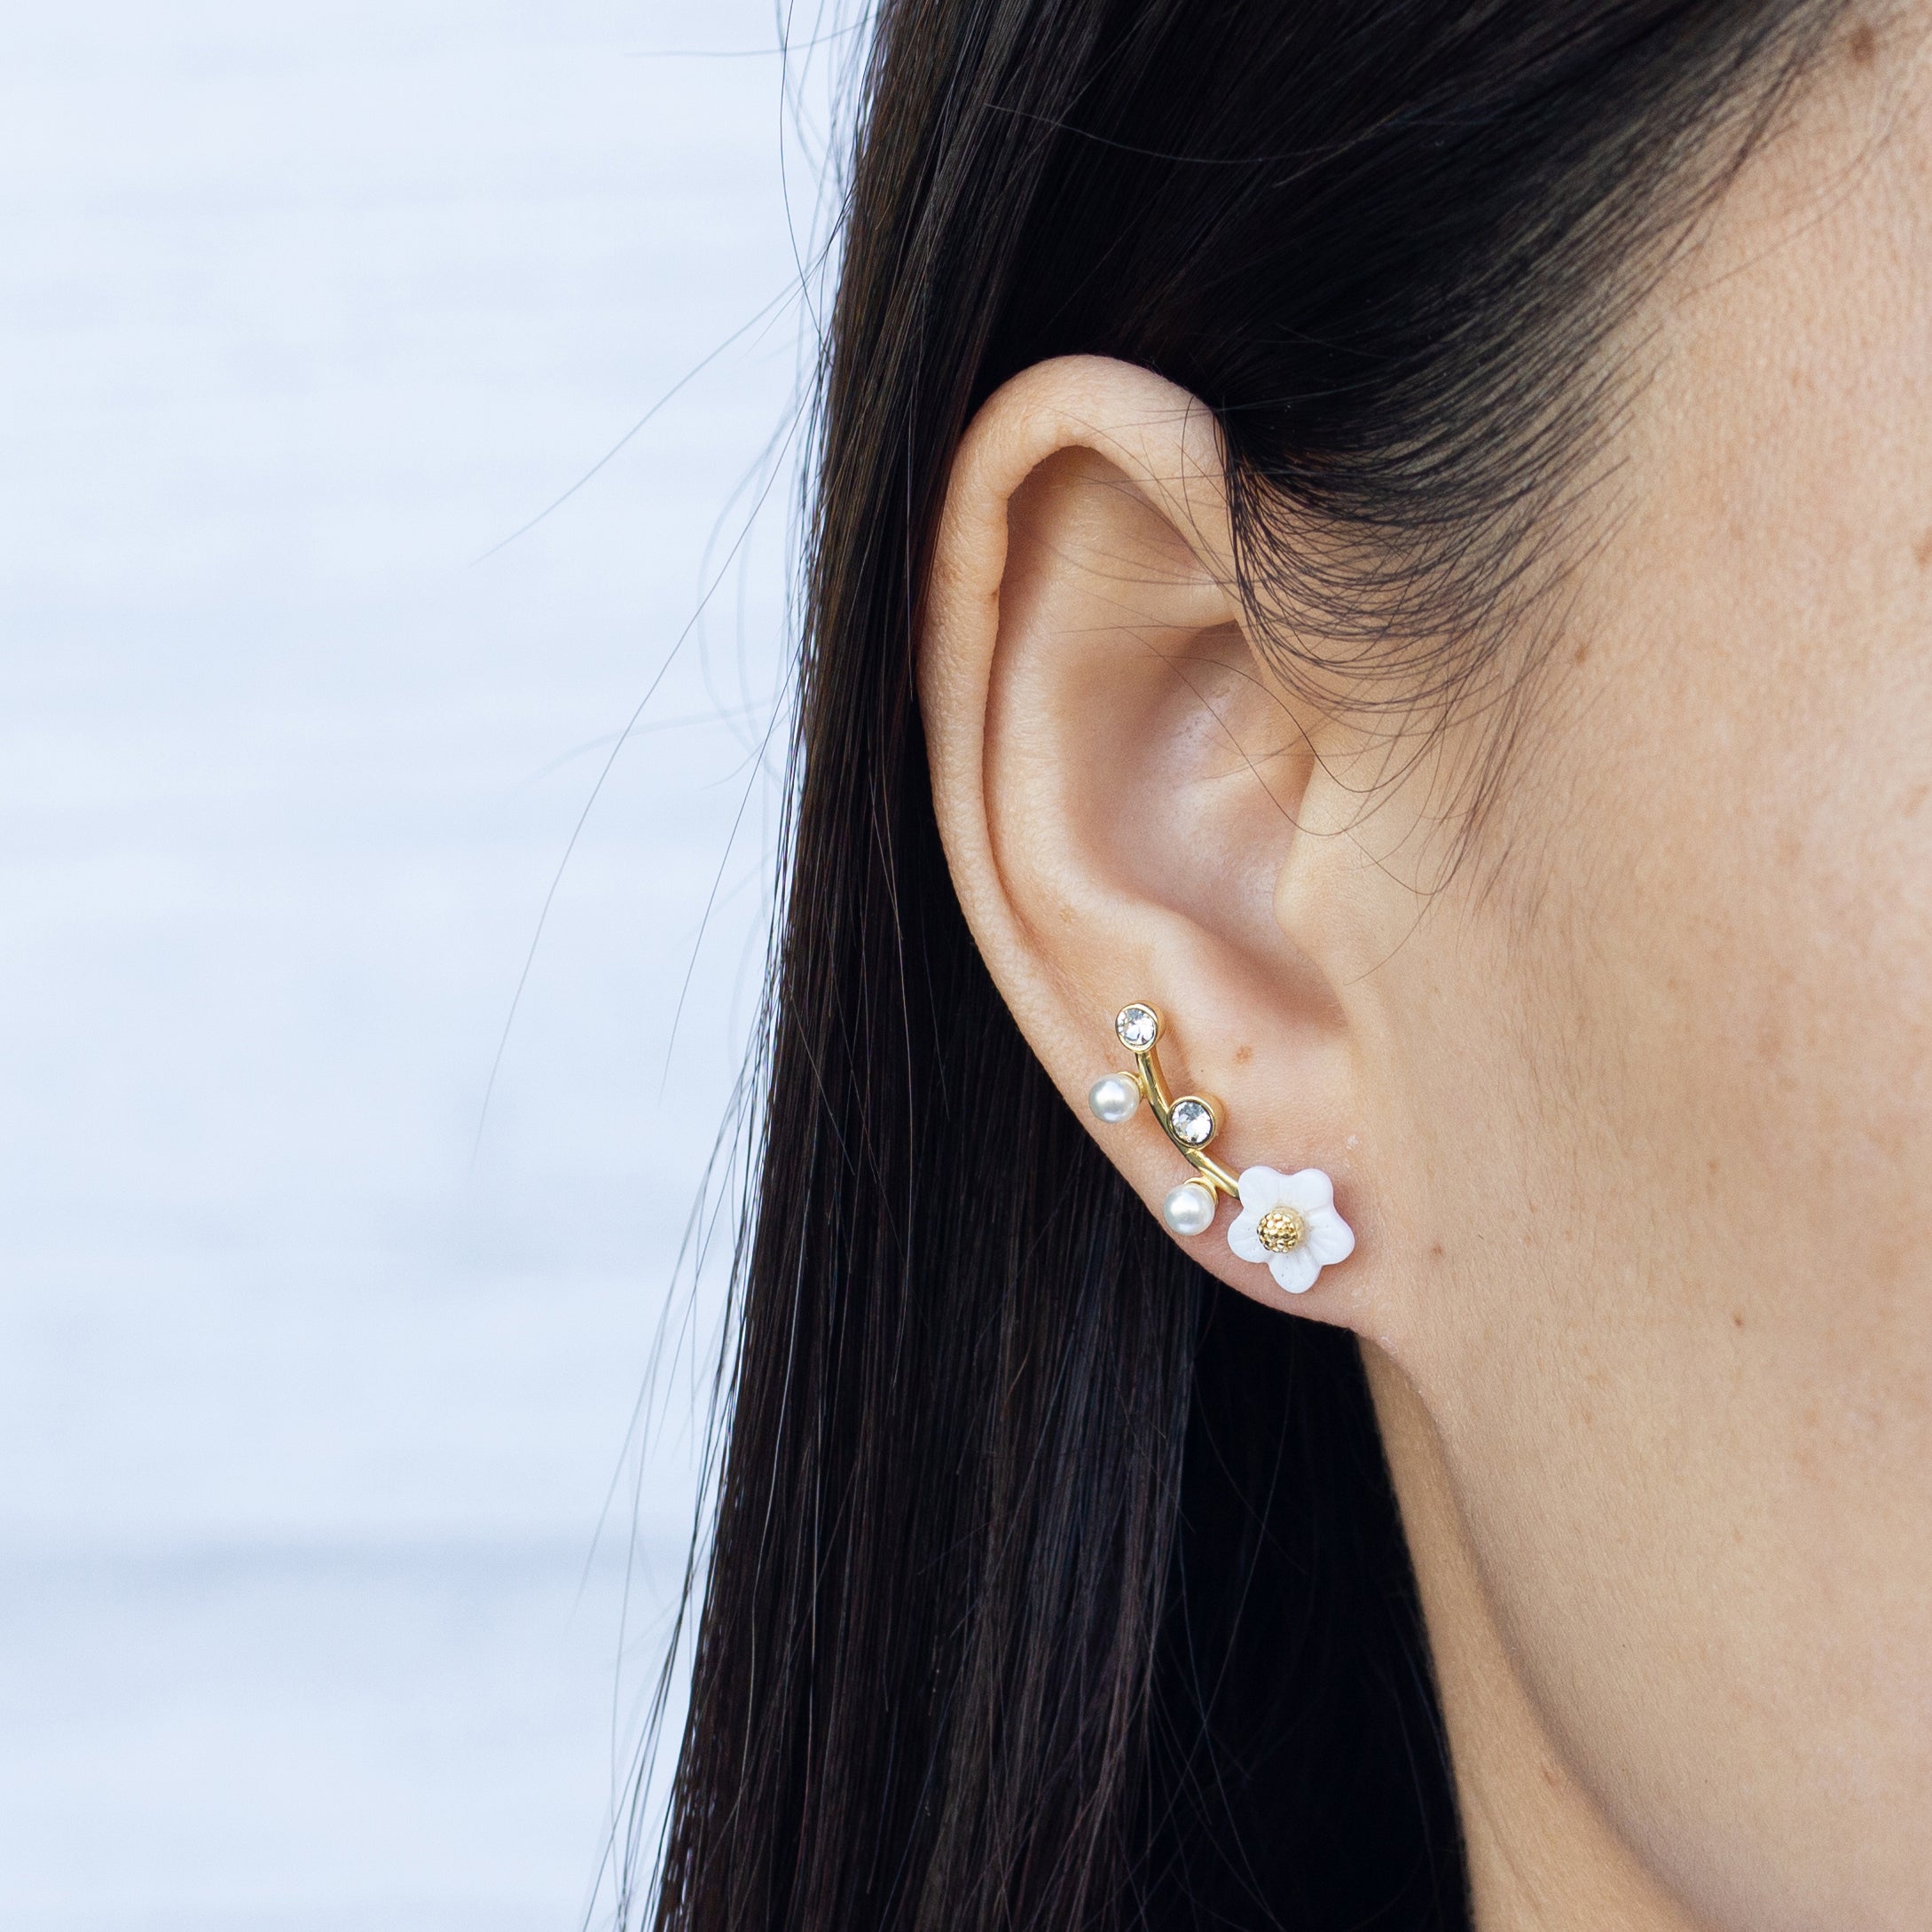 Gold Plated Daisy Climber Earrings Created with Zircondia® Crystals